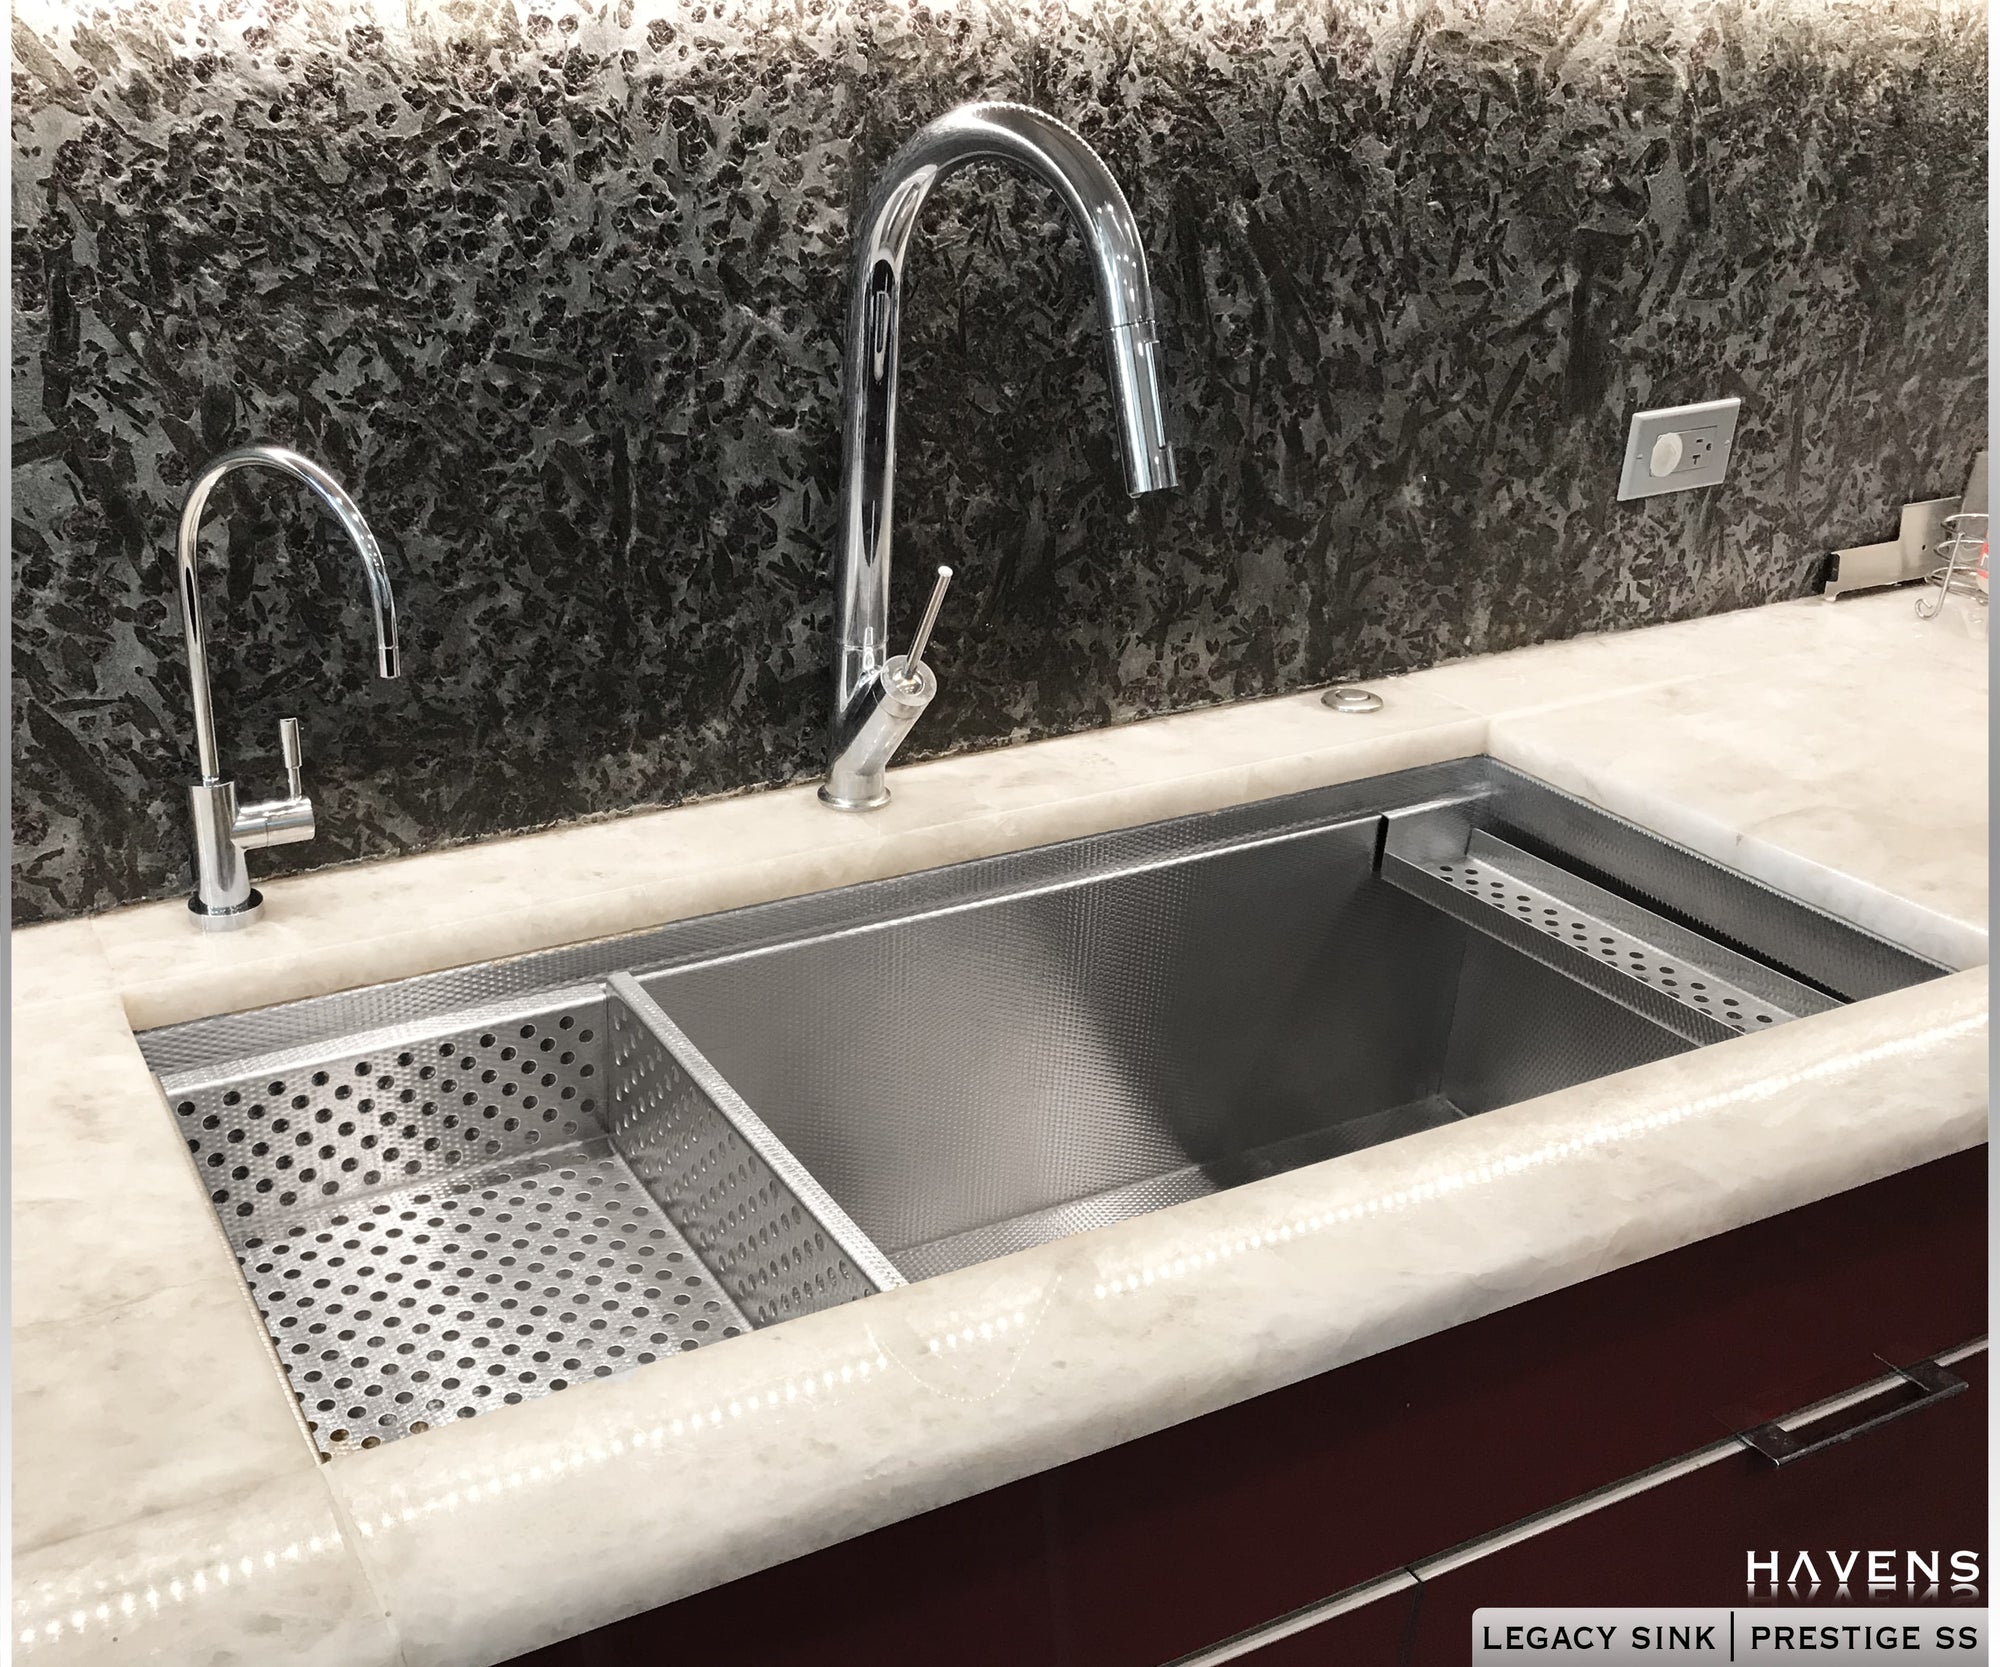 Drop in strainer accessory on left side of sink with advanced luxury sponge caddy on the right side of undermount stainless sink 